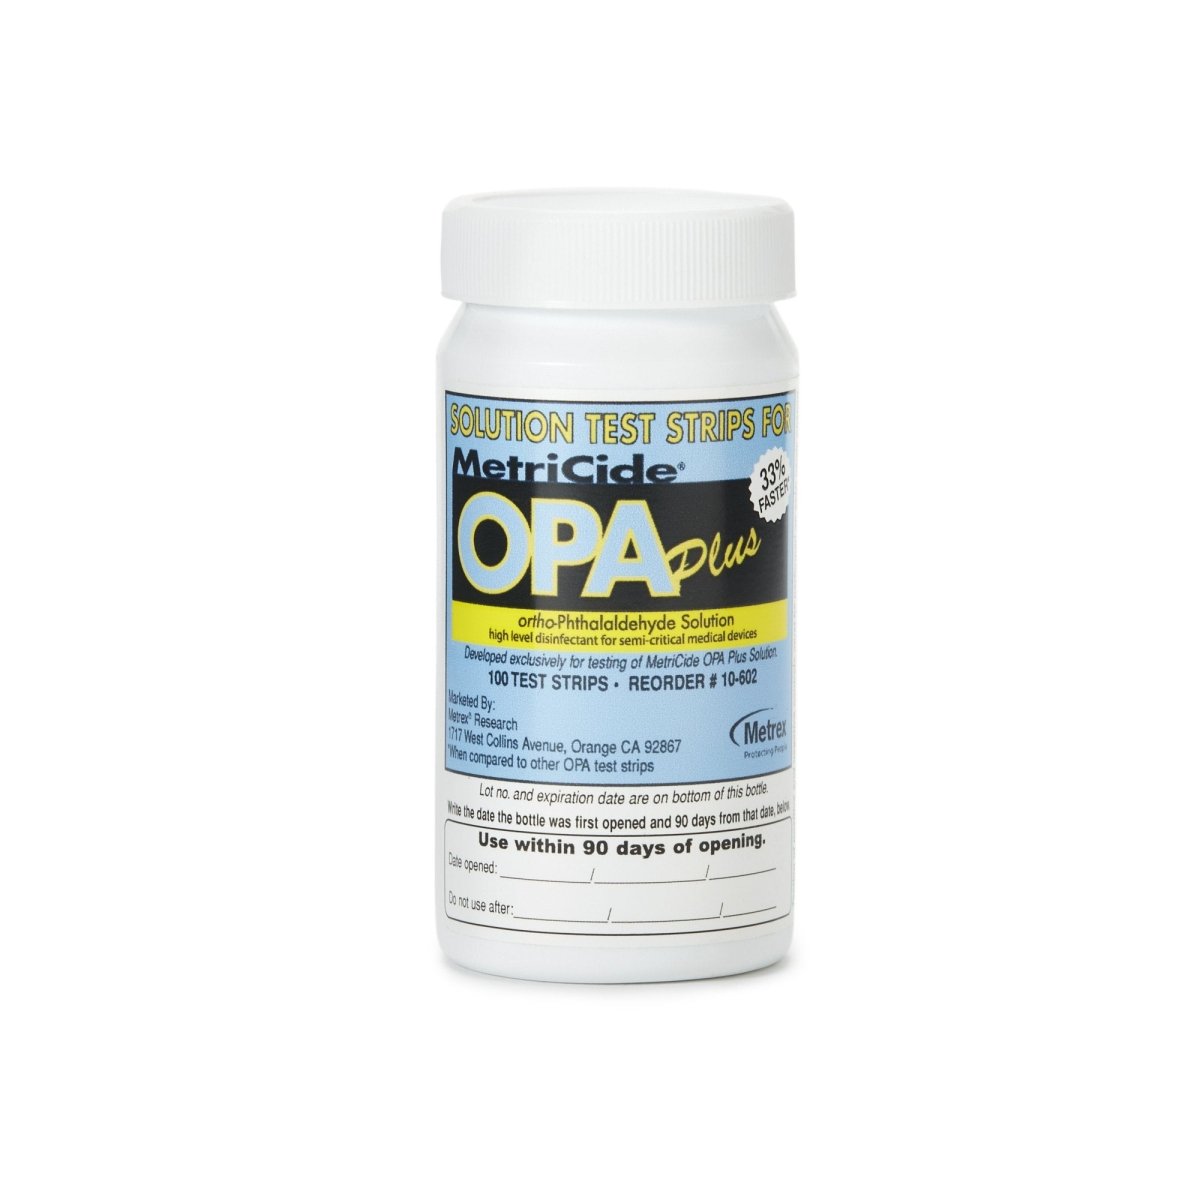 Metricide Opa Plus Opa Concentration Indicator - 636975_BT - 1